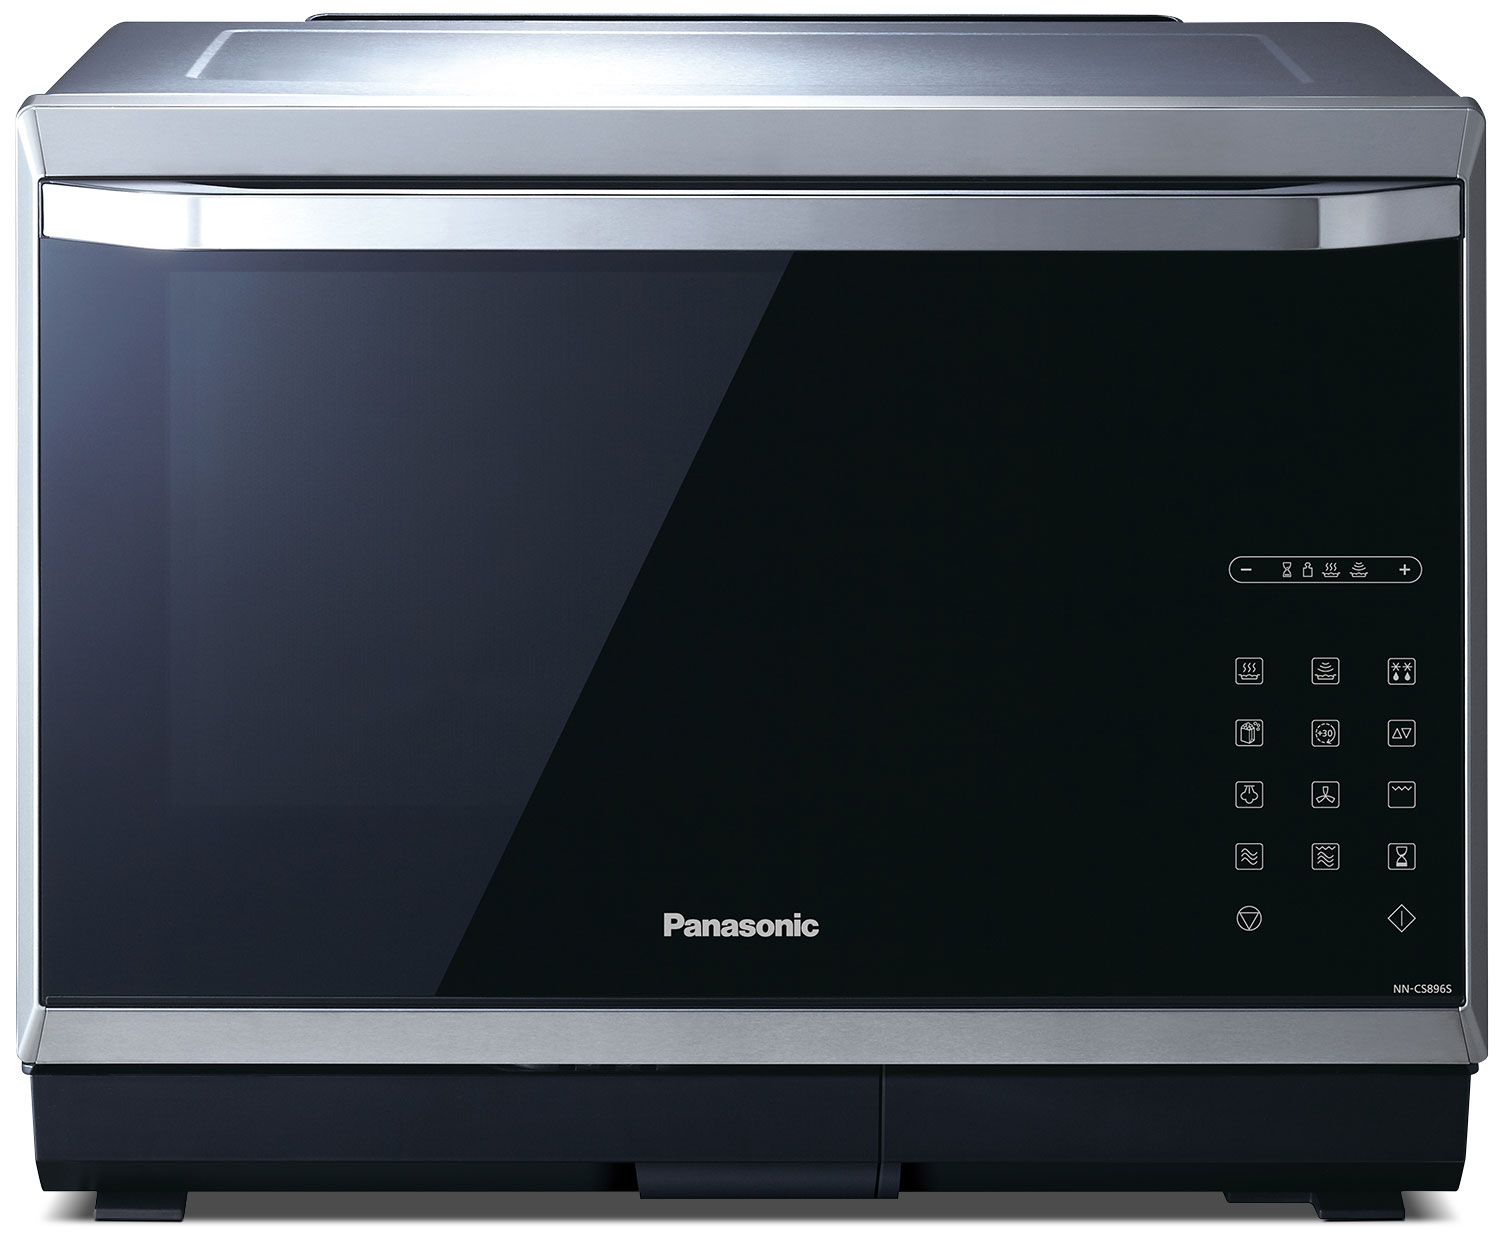 Panasonic Countertop Convection Microwave Oven 28 Images